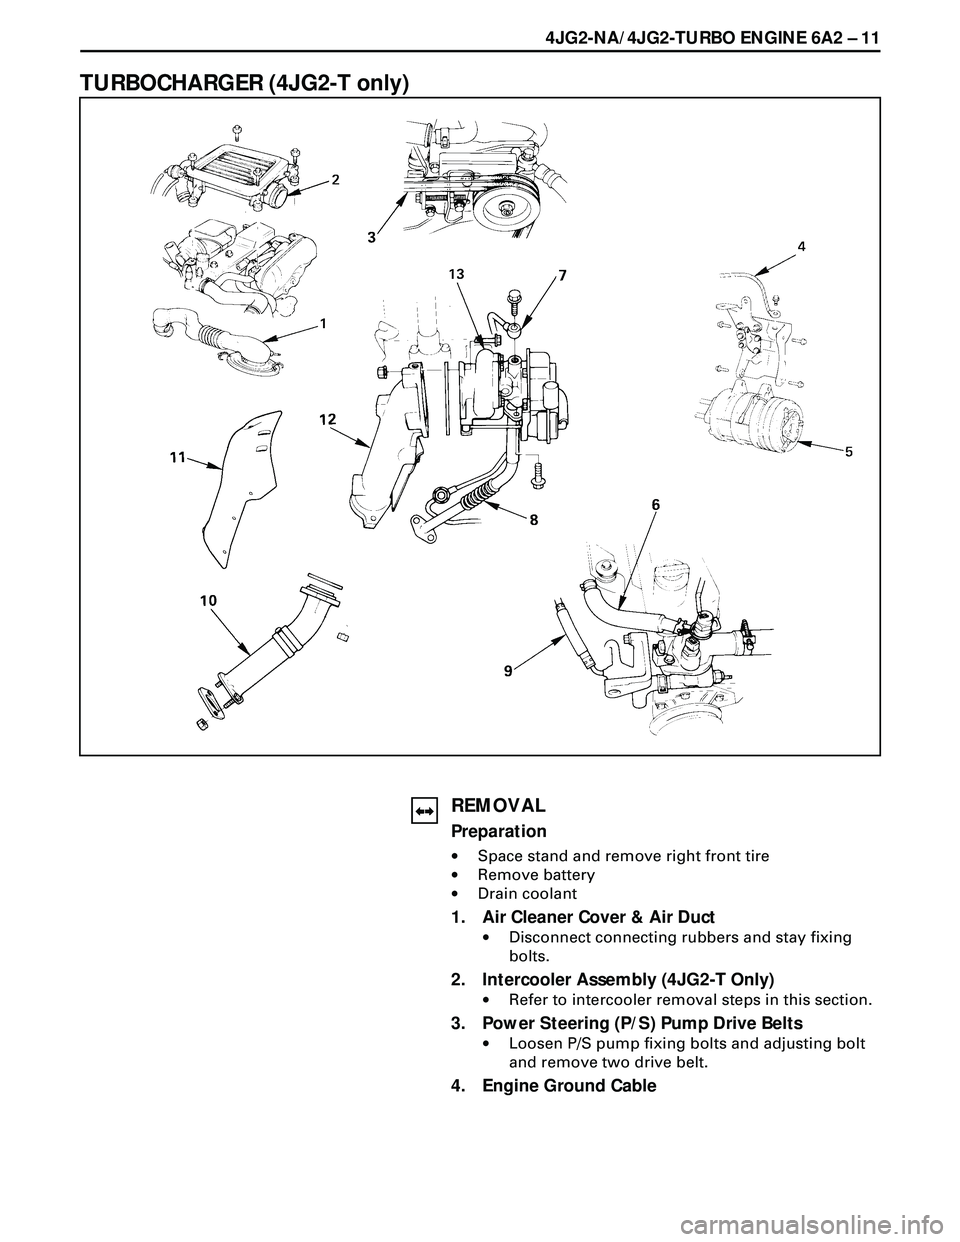 ISUZU TROOPER 1998  Service Owners Guide 4JG2-NA/4JG2-TURBO ENGINE 6A2 Ð 11
TURBOCHARGER (4JG2-T only)
REMOVAL
Preparation
·Space stand and remove right front tire
·Remove battery
·Drain coolant
1. Air Cleaner Cover & Air Duct
·Disconne